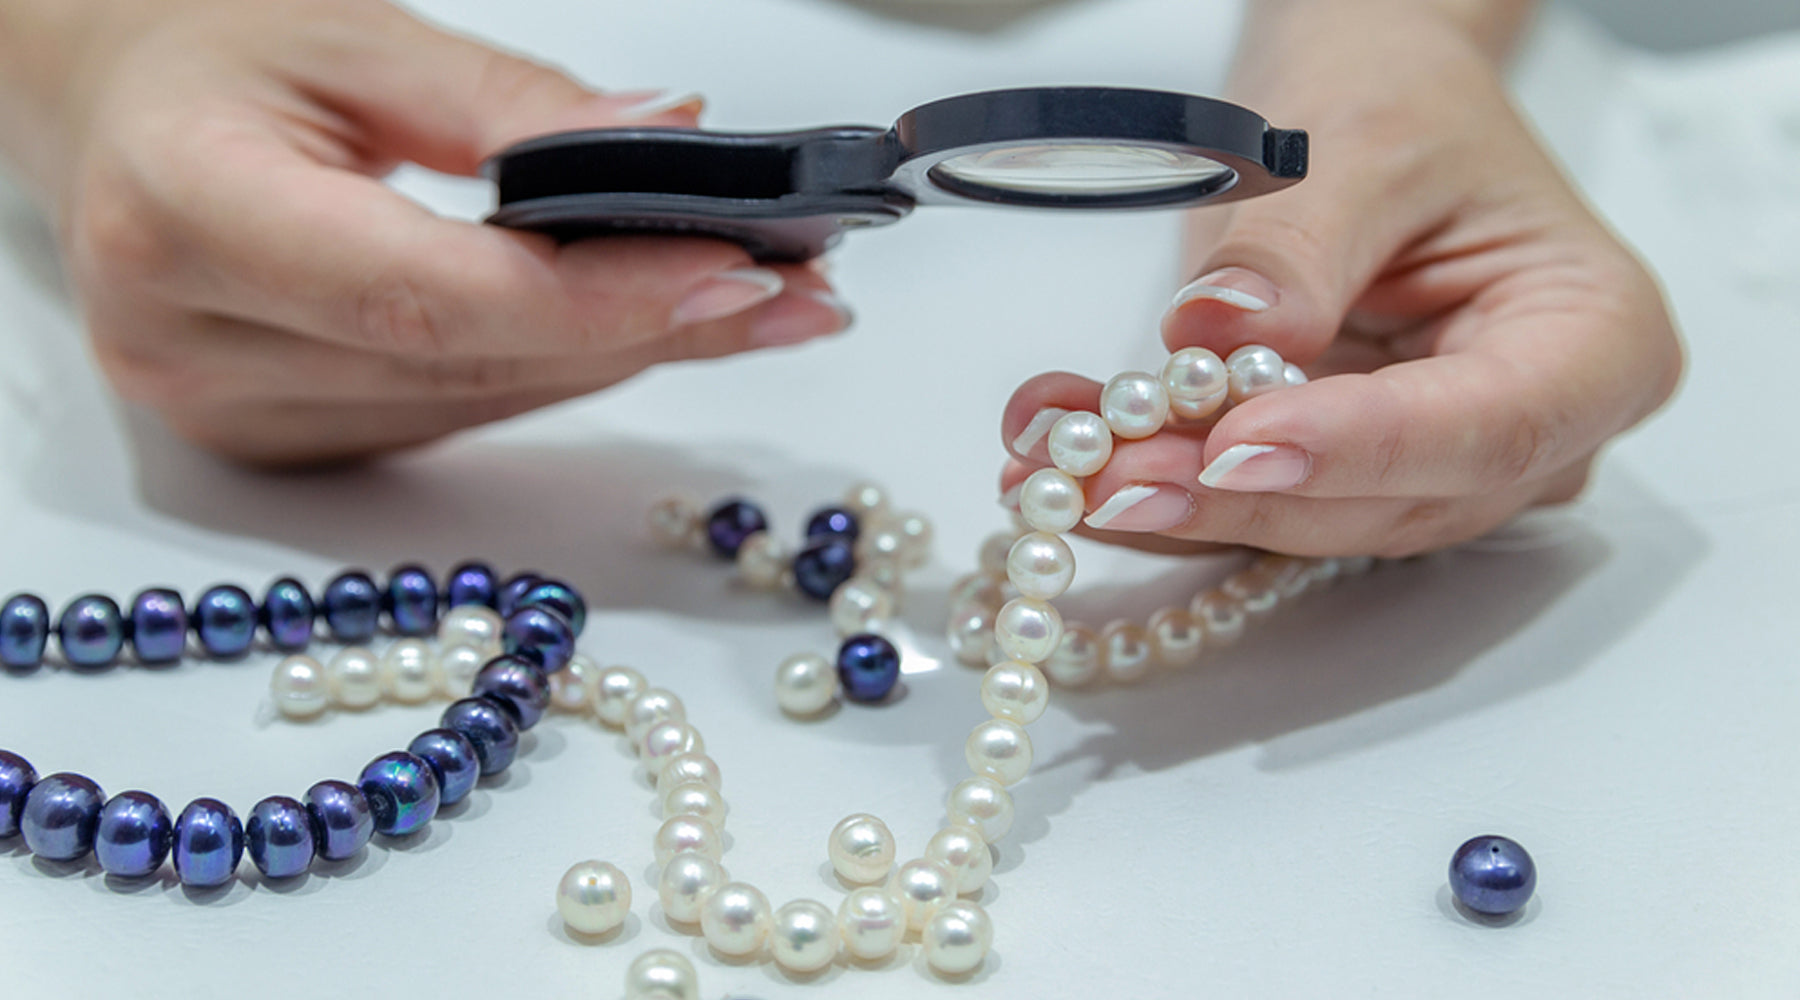 How to check if pearls are real?